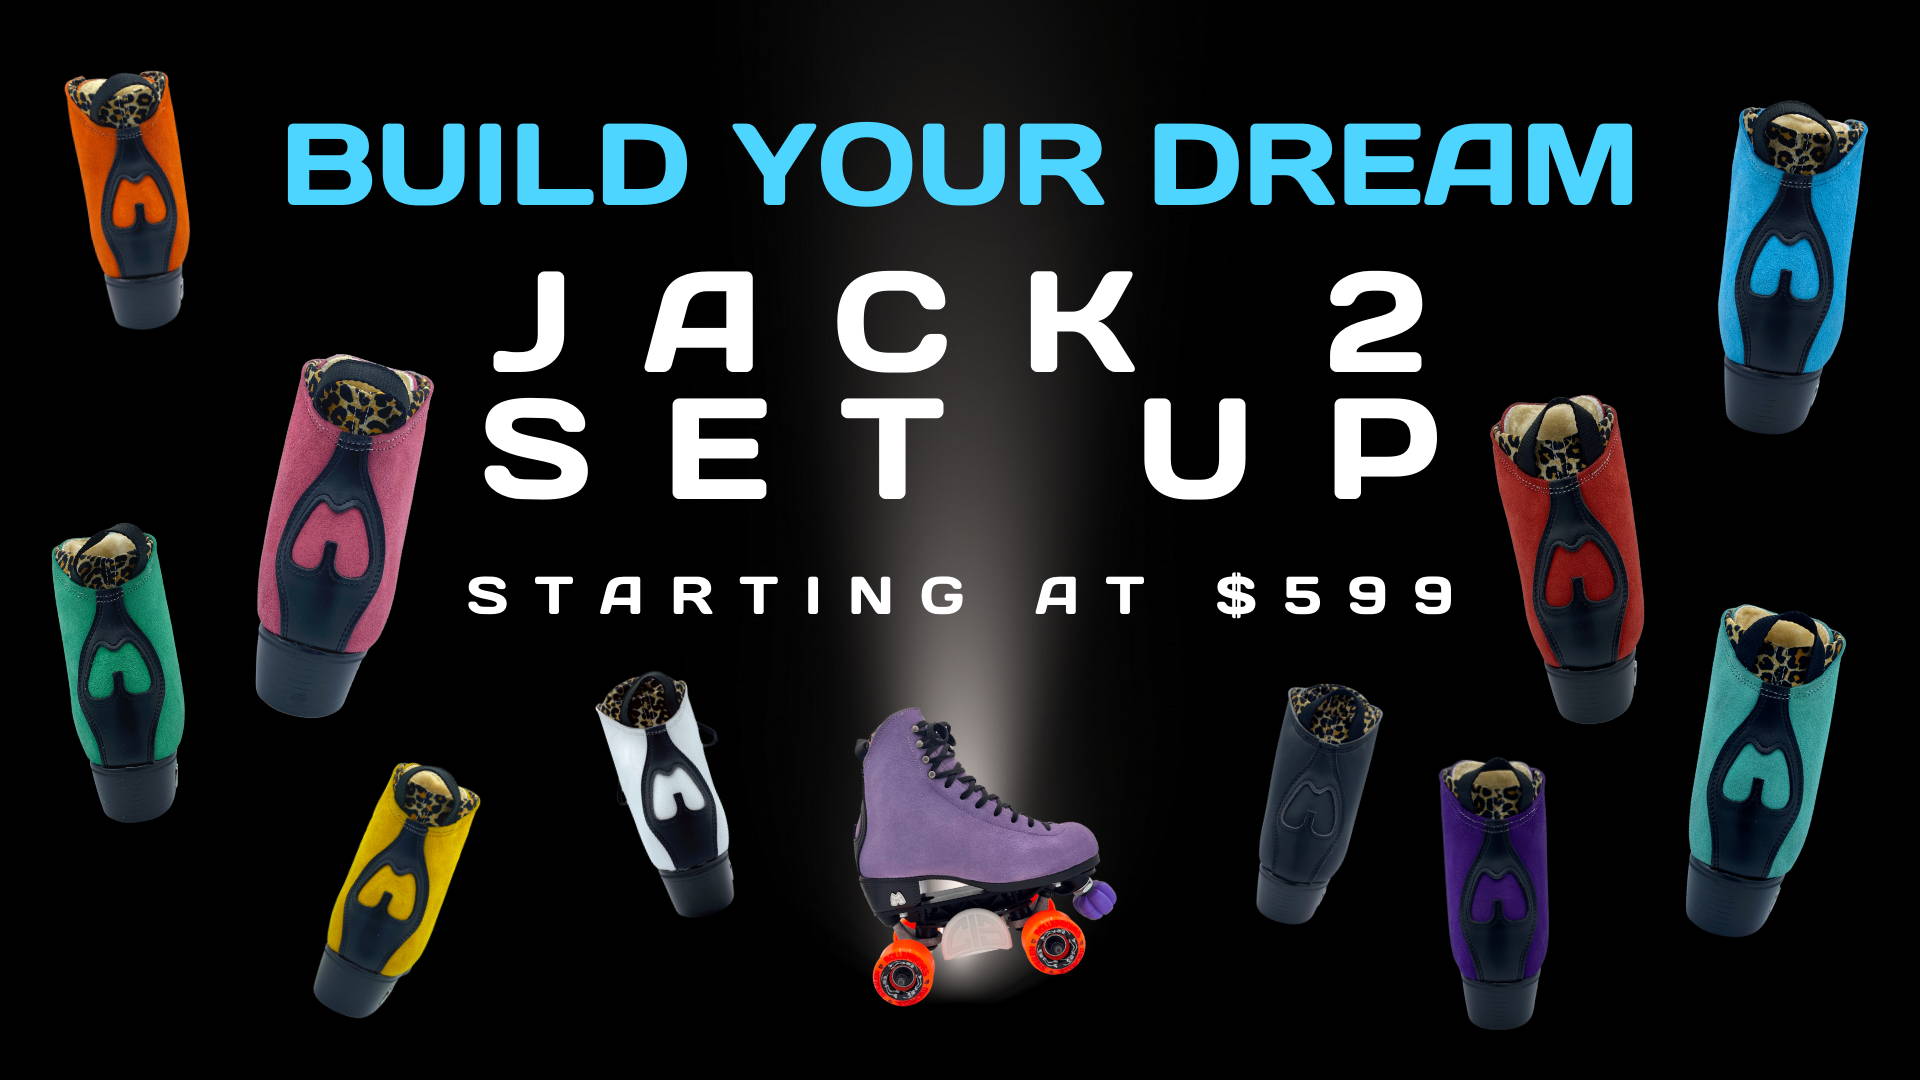 click here to build your dream Jack 2 set up. Starting at $599.